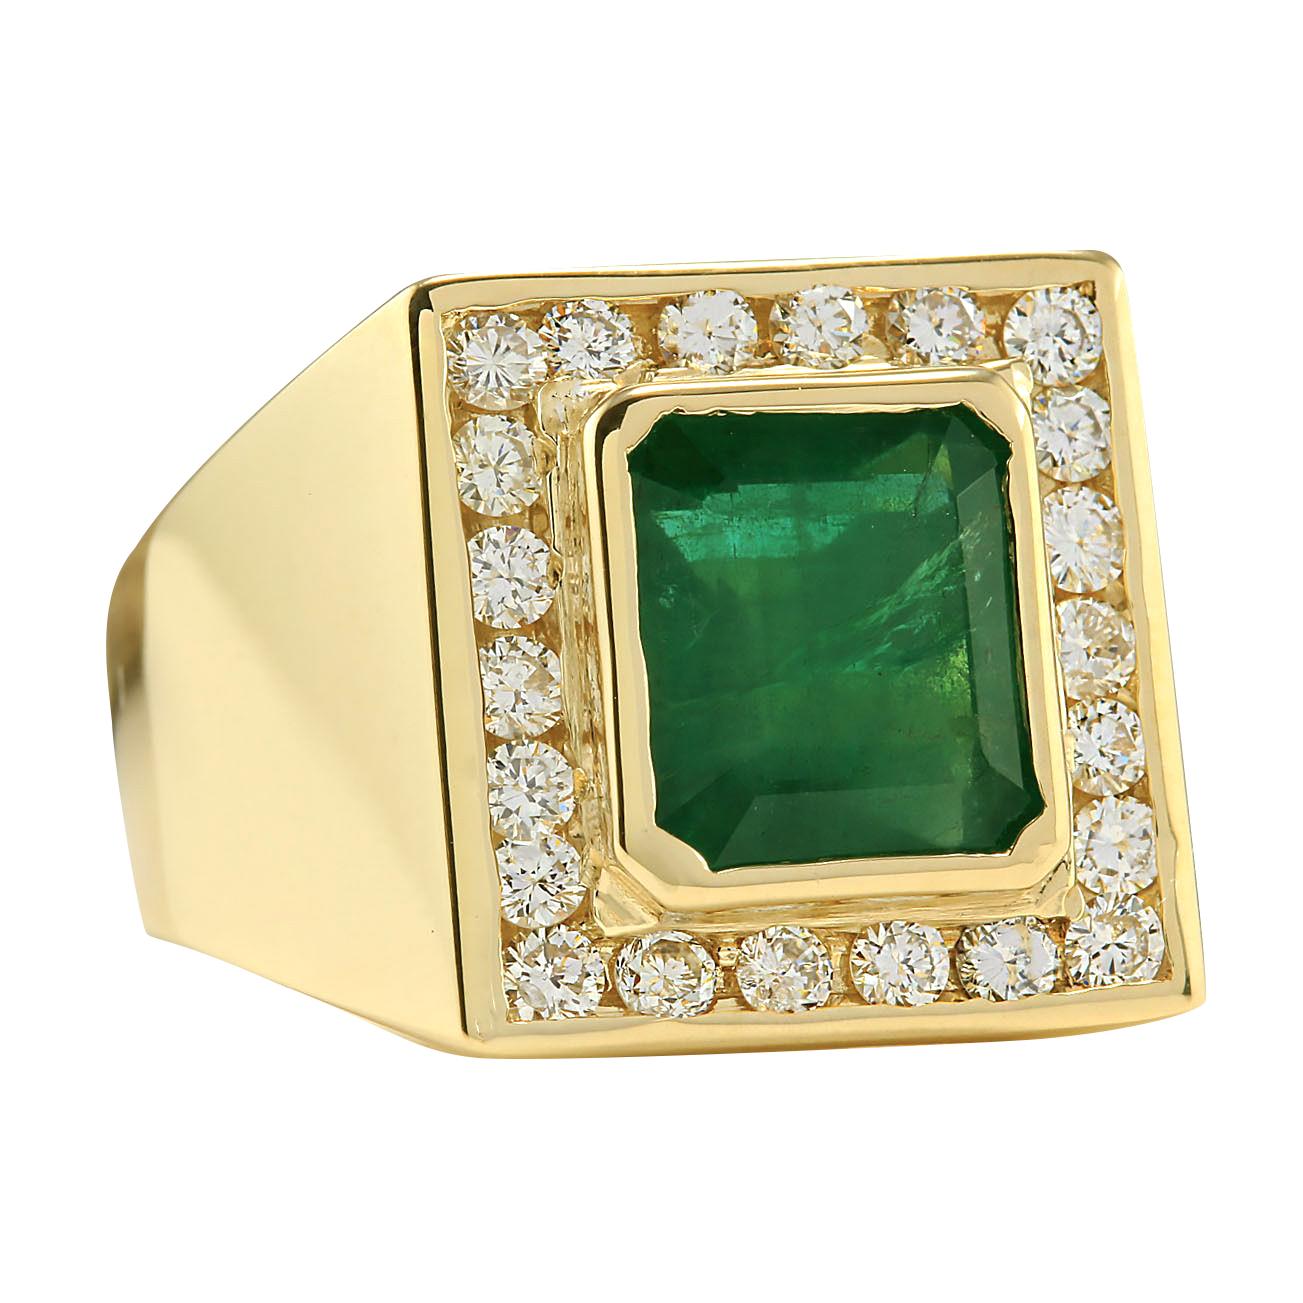 5.00 Carat Emerald 14 Karat Yellow Gold Diamond Ring
Stamped: 14K Yellow Gold
Total Ring Weight: 15.5 Grams
Total  Emerald Weight is 4.10 Carat (Measures: 11.00x10.00 mm)
Color: Green
Total  Diamond Weight is 0.90 Carat
Color: F-G, Clarity: